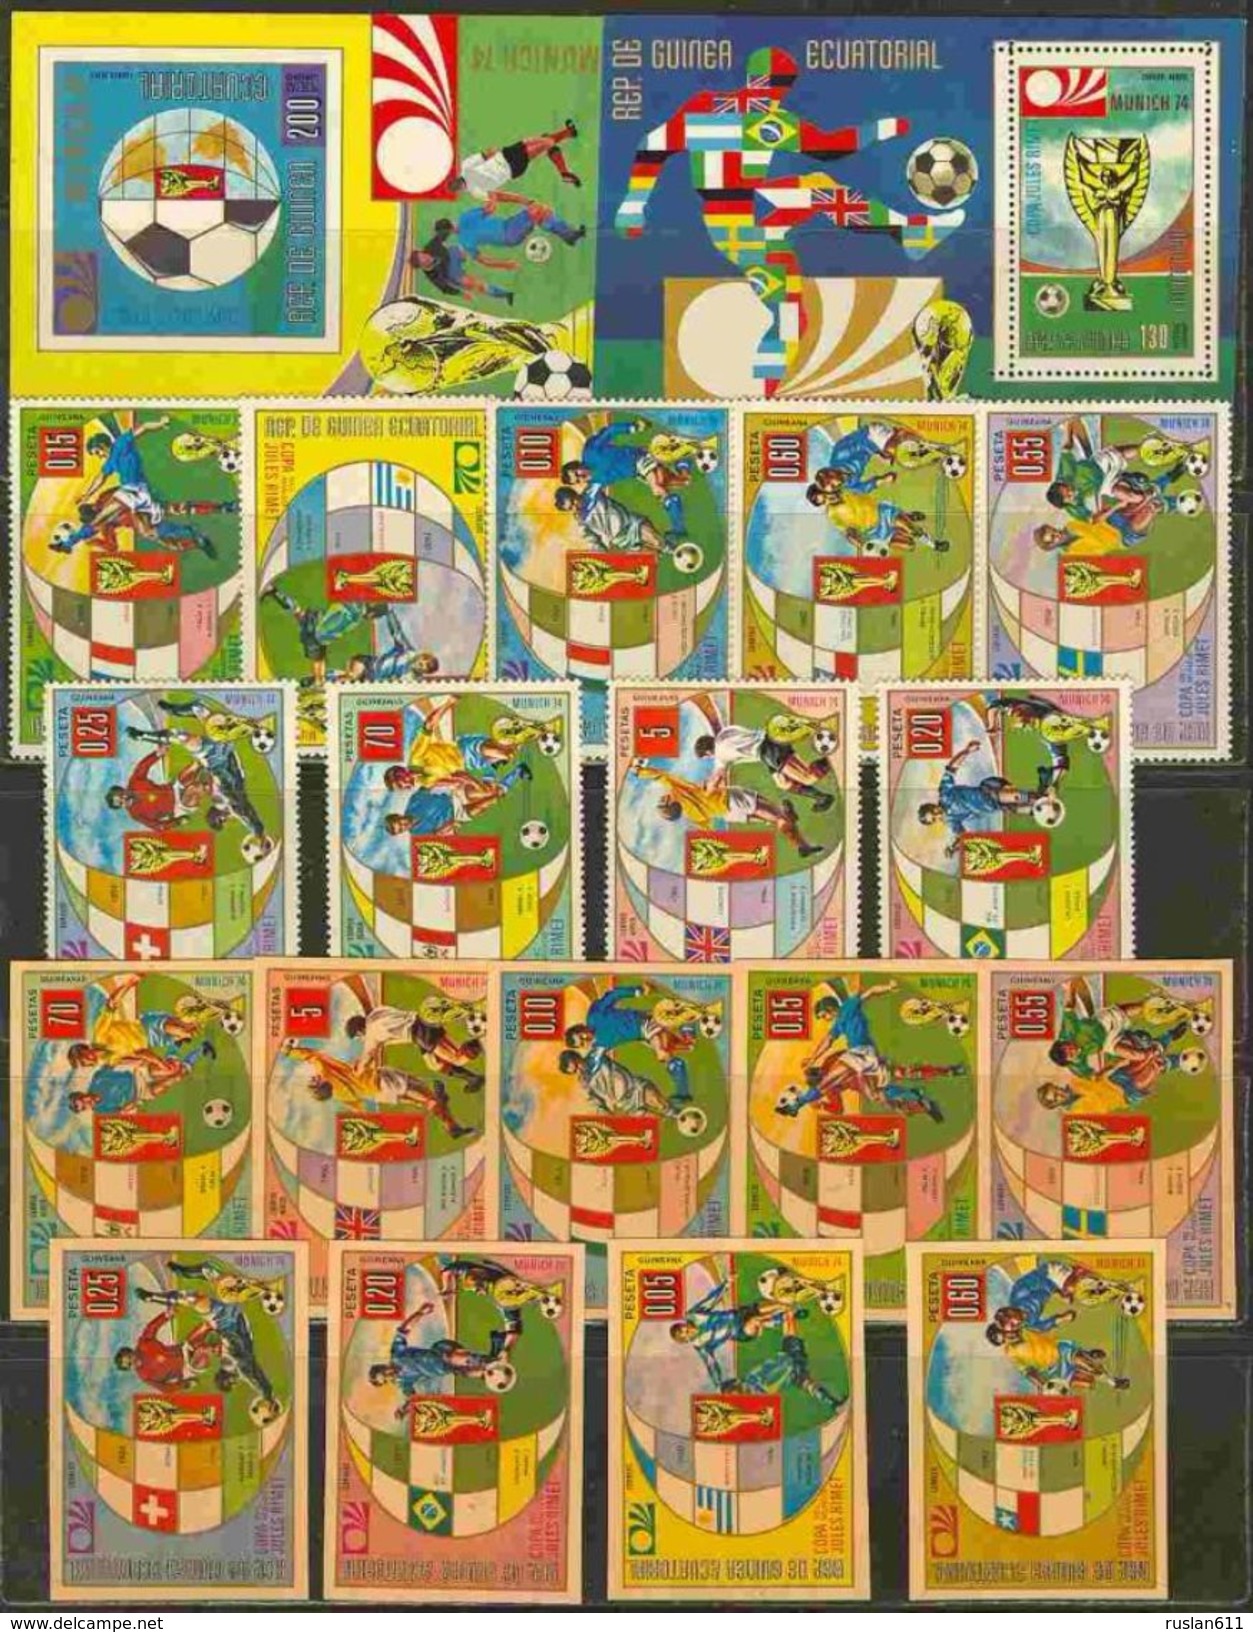 Soccer Football Equatorial Guinea #275/83 A/B + Bl 76/7 MNH ** 1974 World Cup In Germany - 1974 – West Germany